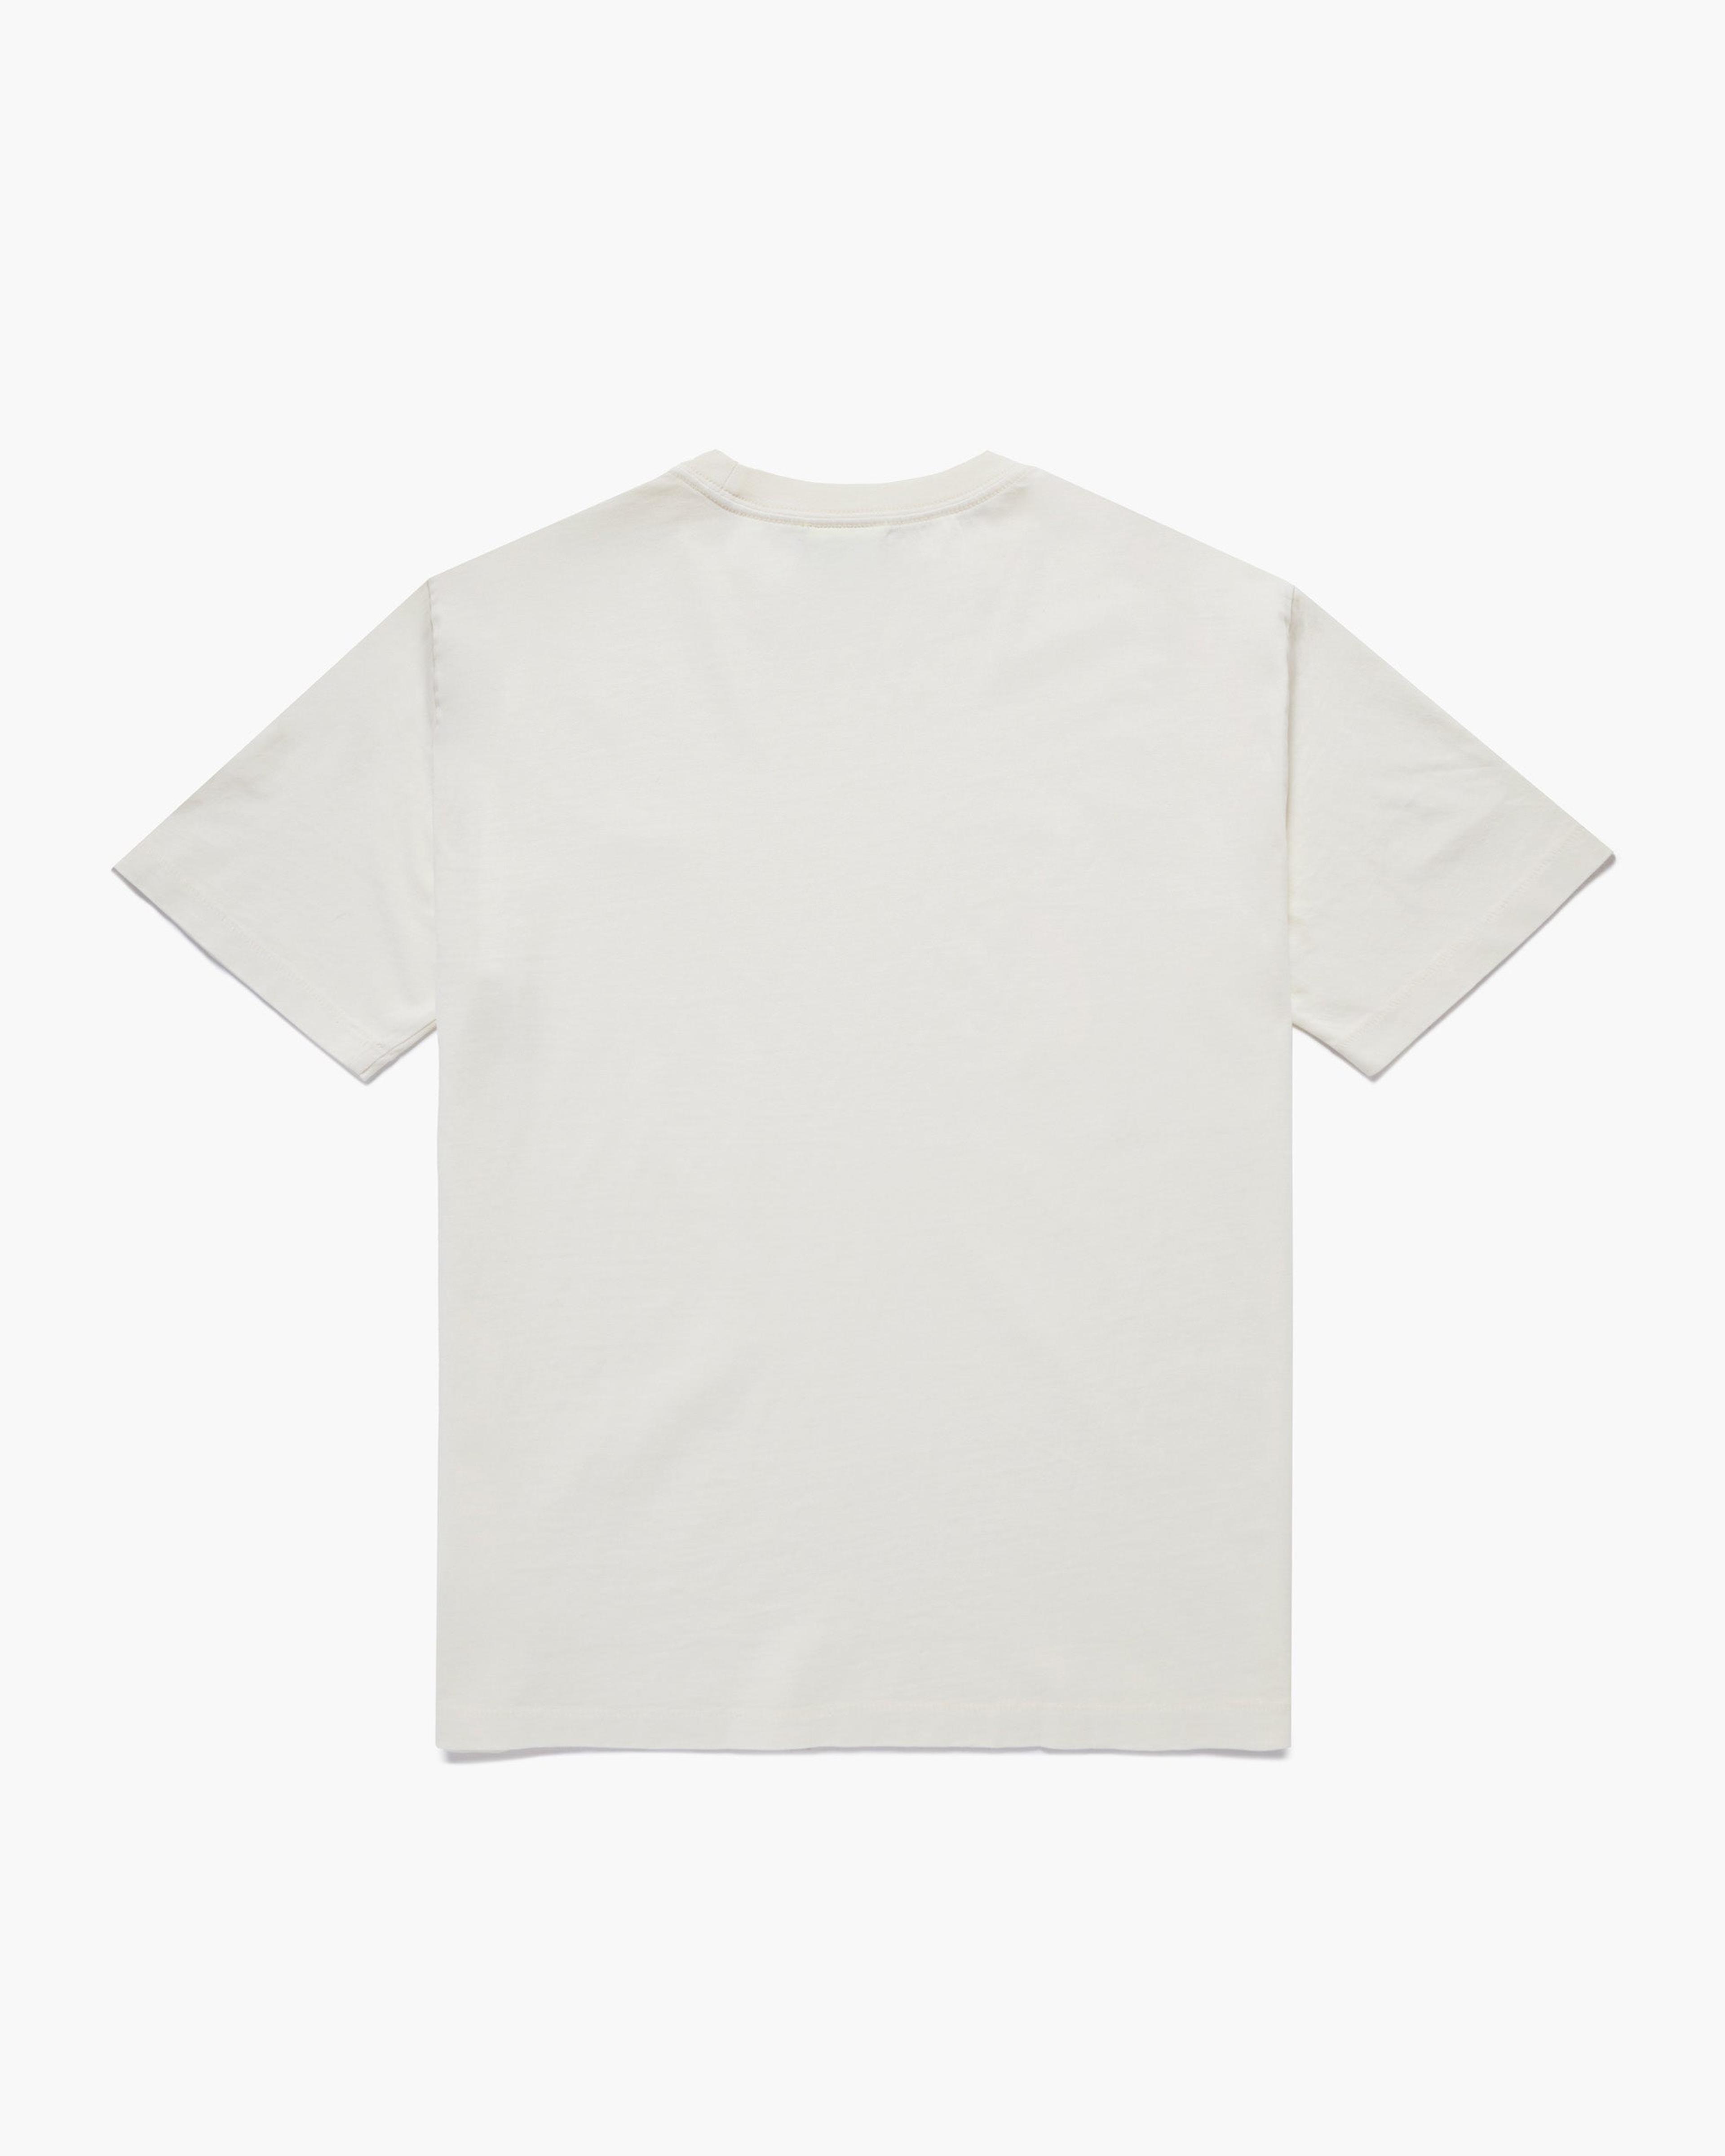 Alternate View 1 of SUPERVSN OVAL TEE